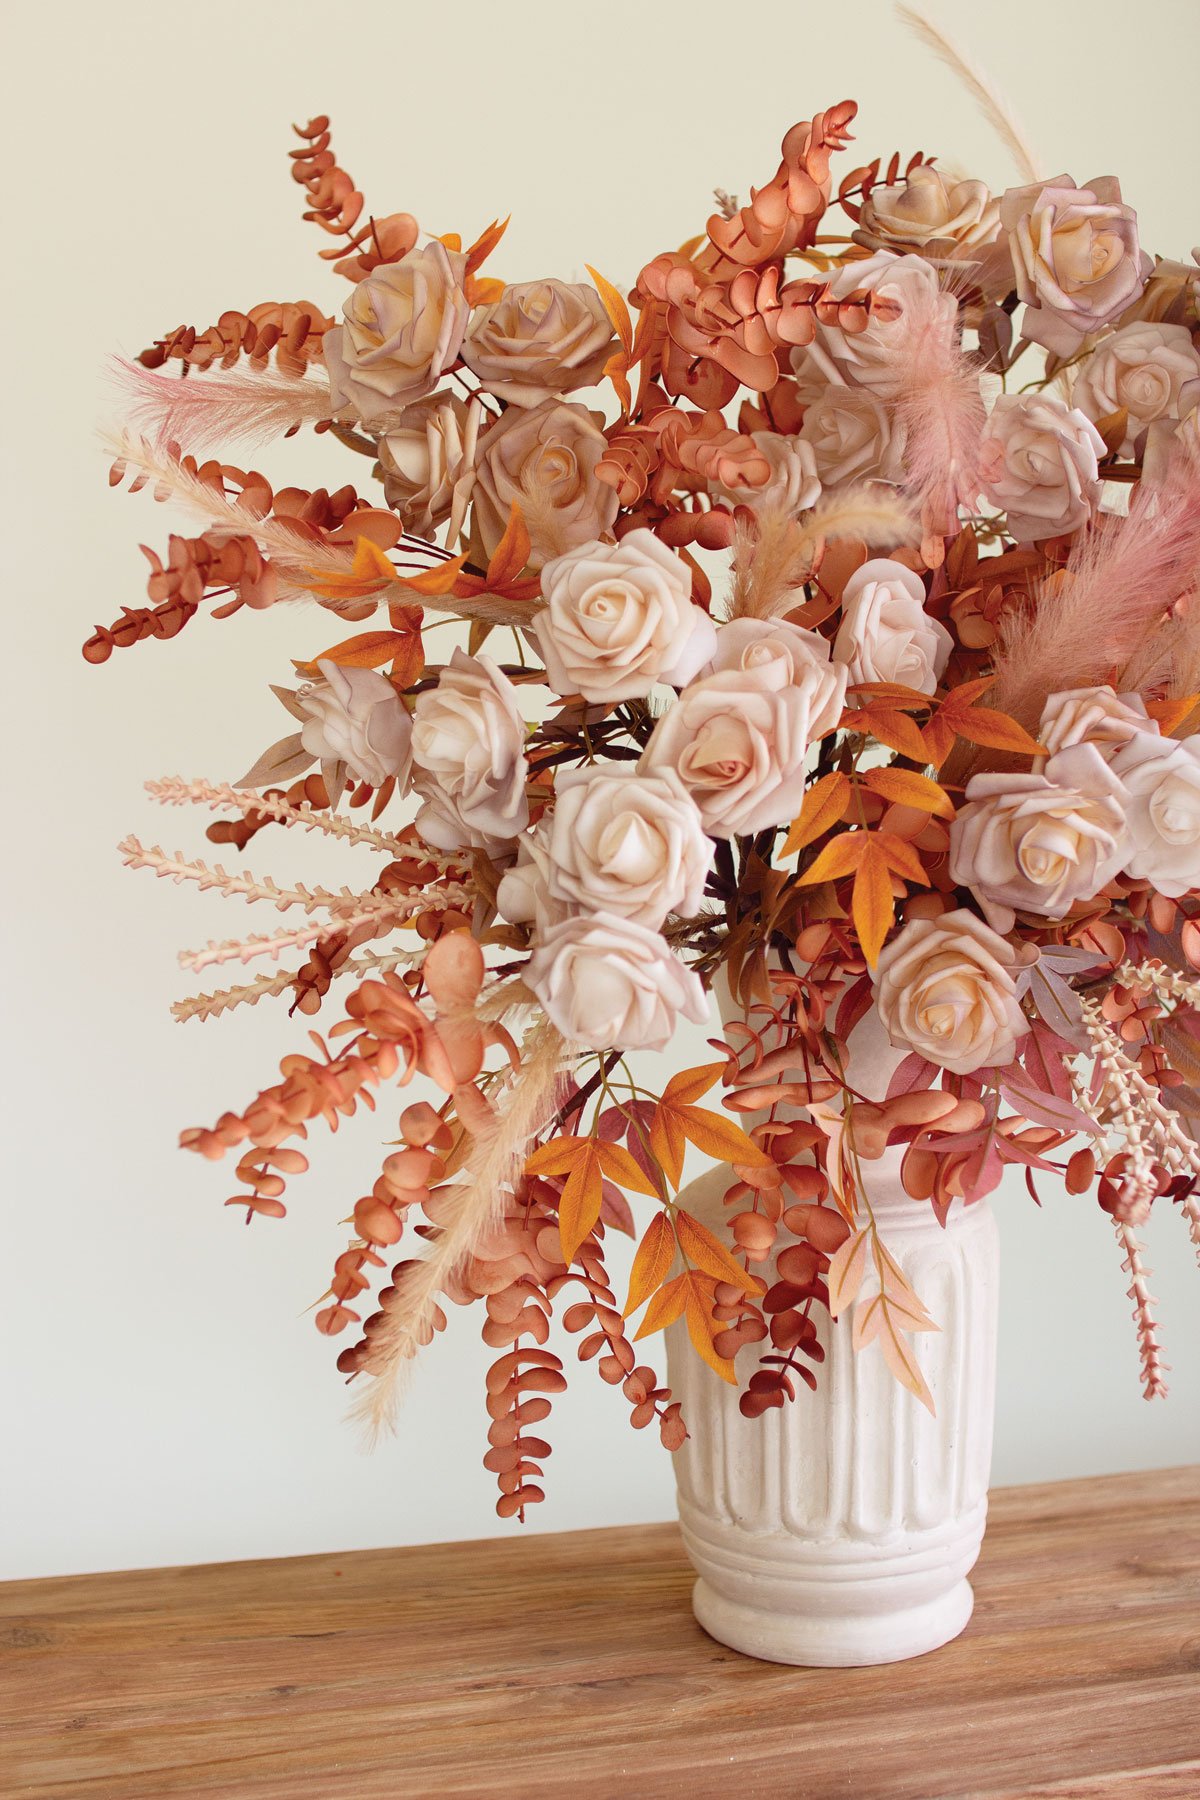 pale pink roses, pink feathers, and pink and orange leaves and eucalyptus in a white vase